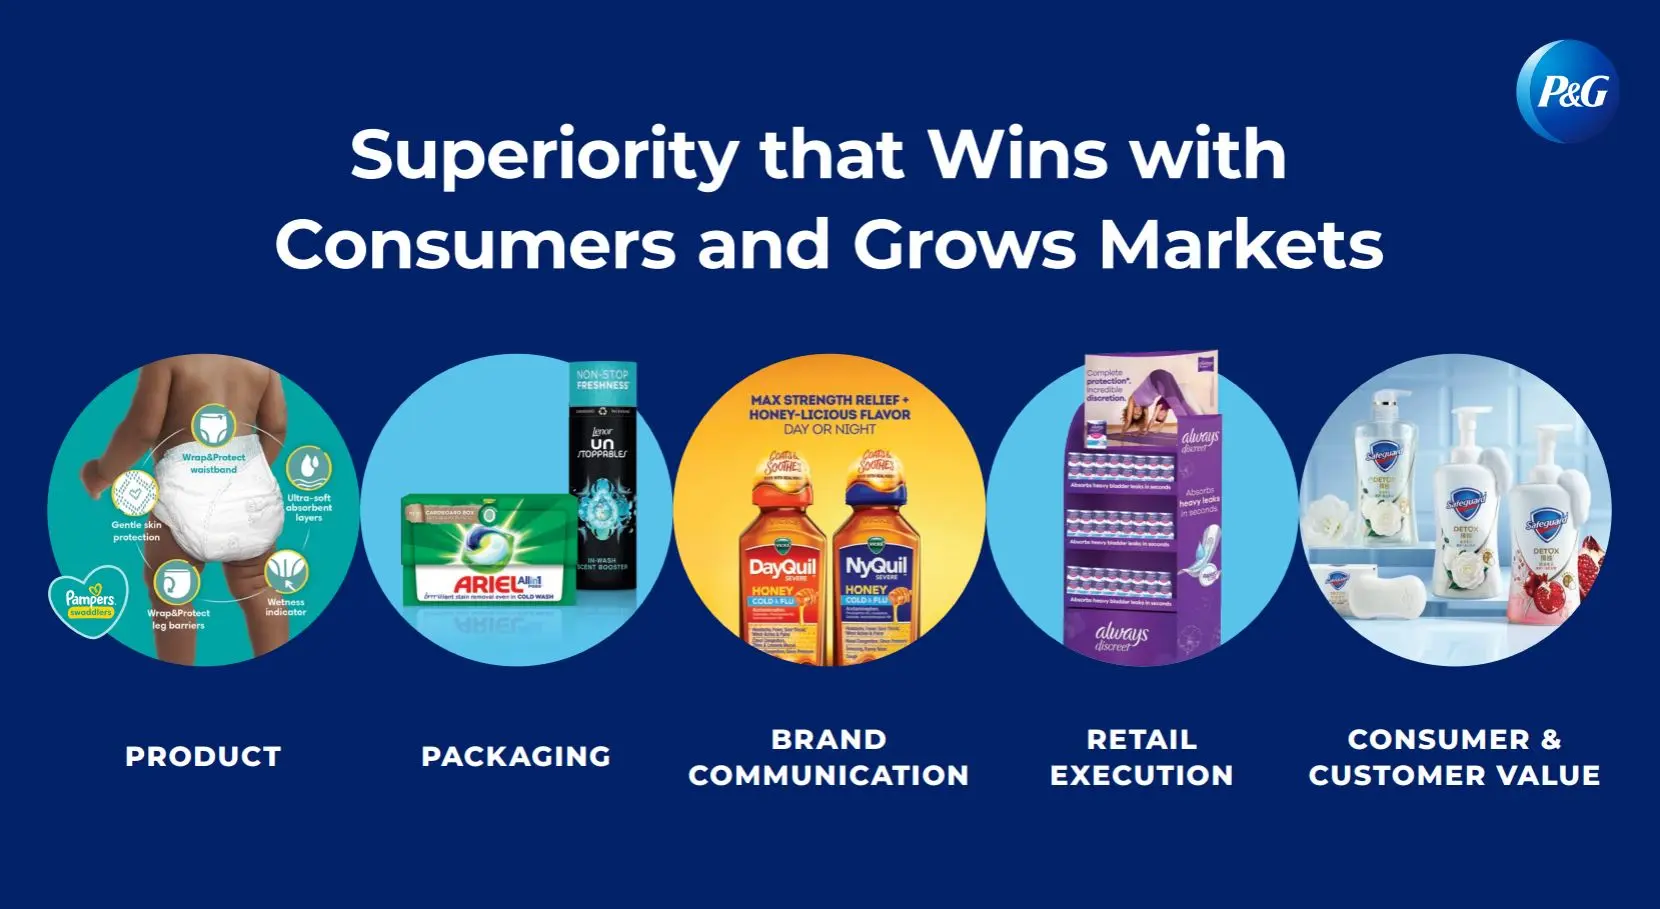 Superiority that Wins with Consumers and Grows Markets. Five images: Pampers, Ariel, DayQuil and Nyquil, Always Discreet and Safeguard with the captions product, packaging, brand communication, retail execution and consumer & customer value.